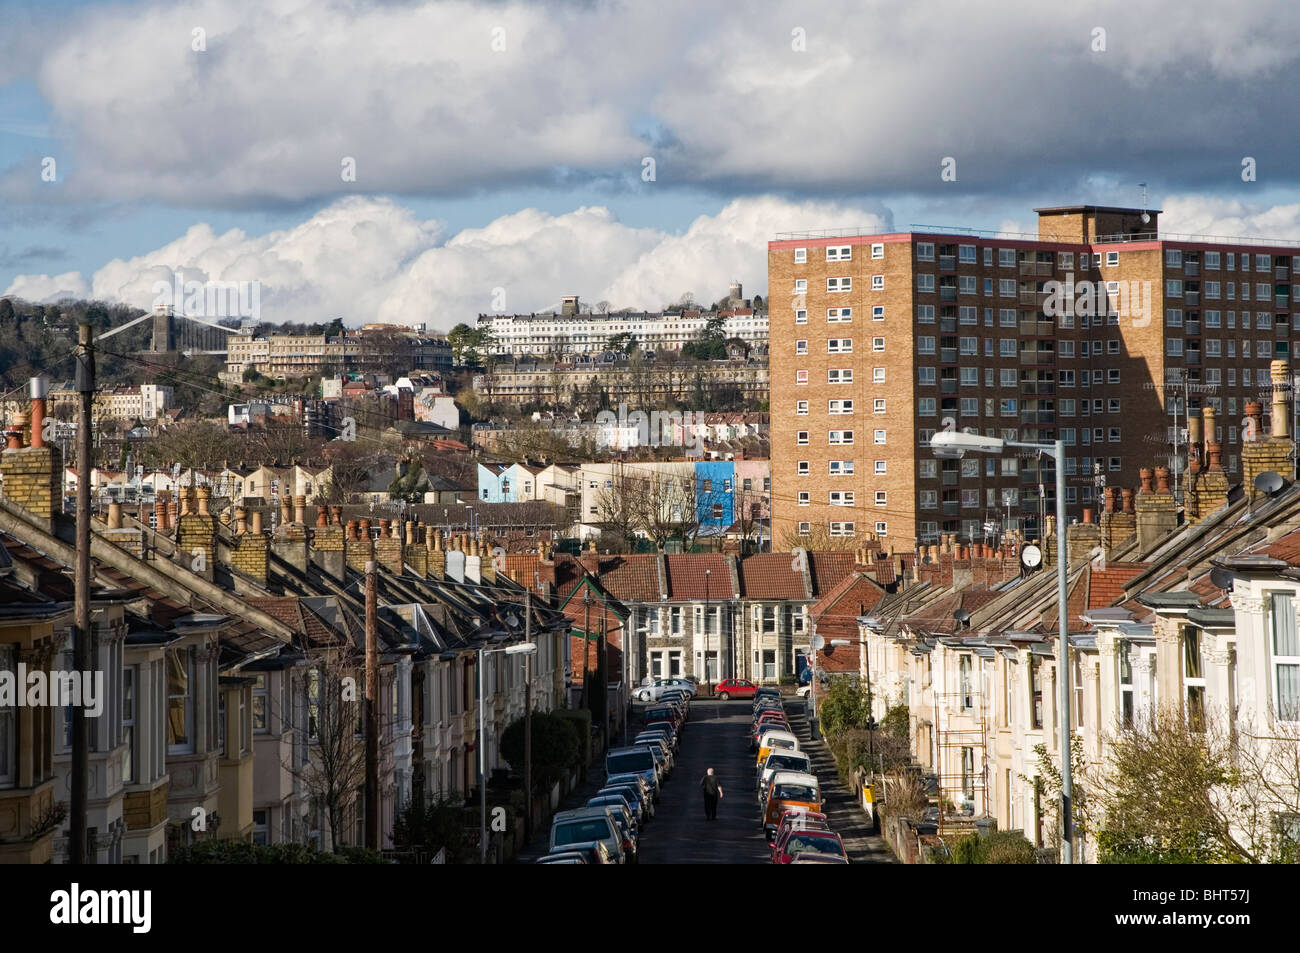 View from south Bristol over the city showing the high density of housing and various types of typical British housing stock. Stock Photo